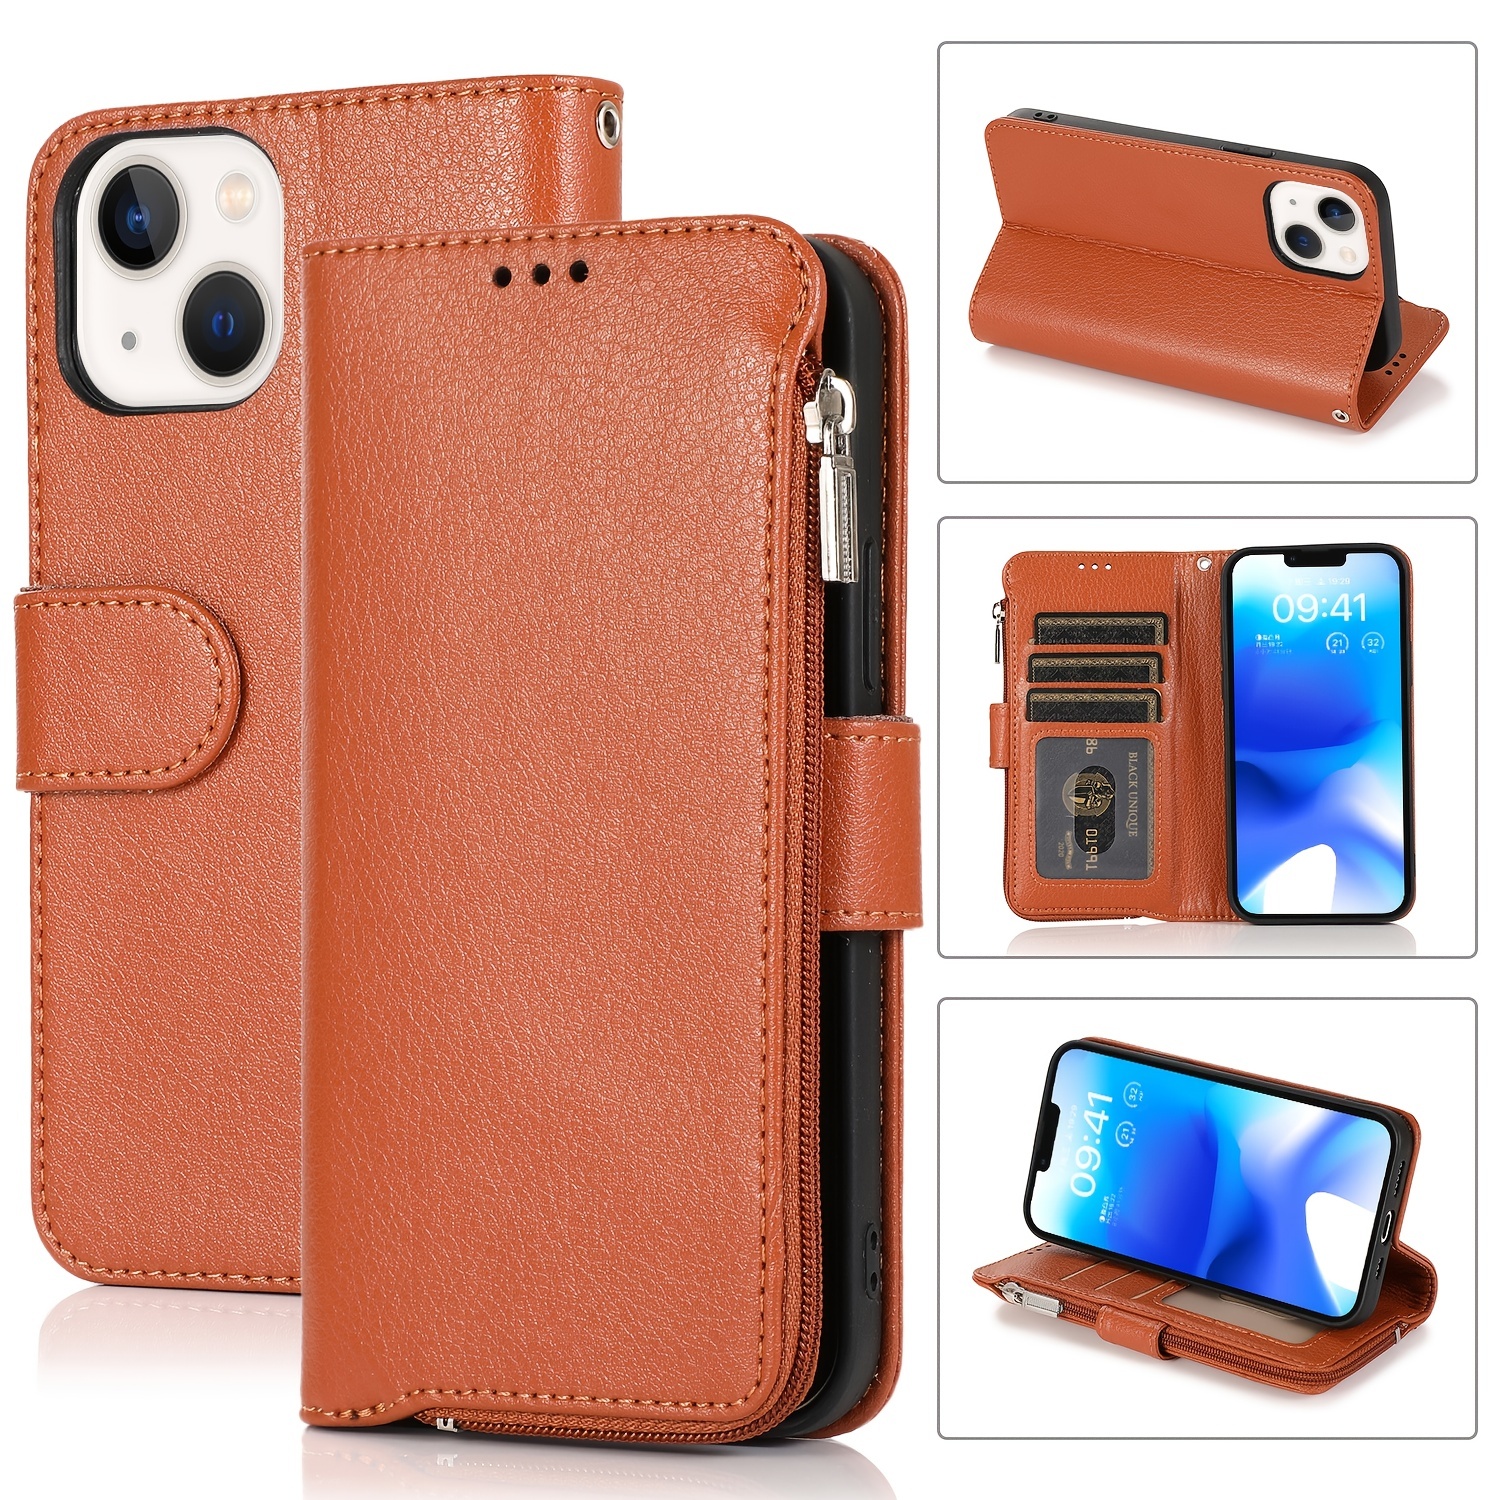 LOHASIC for iPhone 13 Pro Max Wallet Case, 5 Card Holder Phone Cover to Men  Women, Premium PU Leather Credit Slot, Magnetic Clasp Kickstand Flip Folio